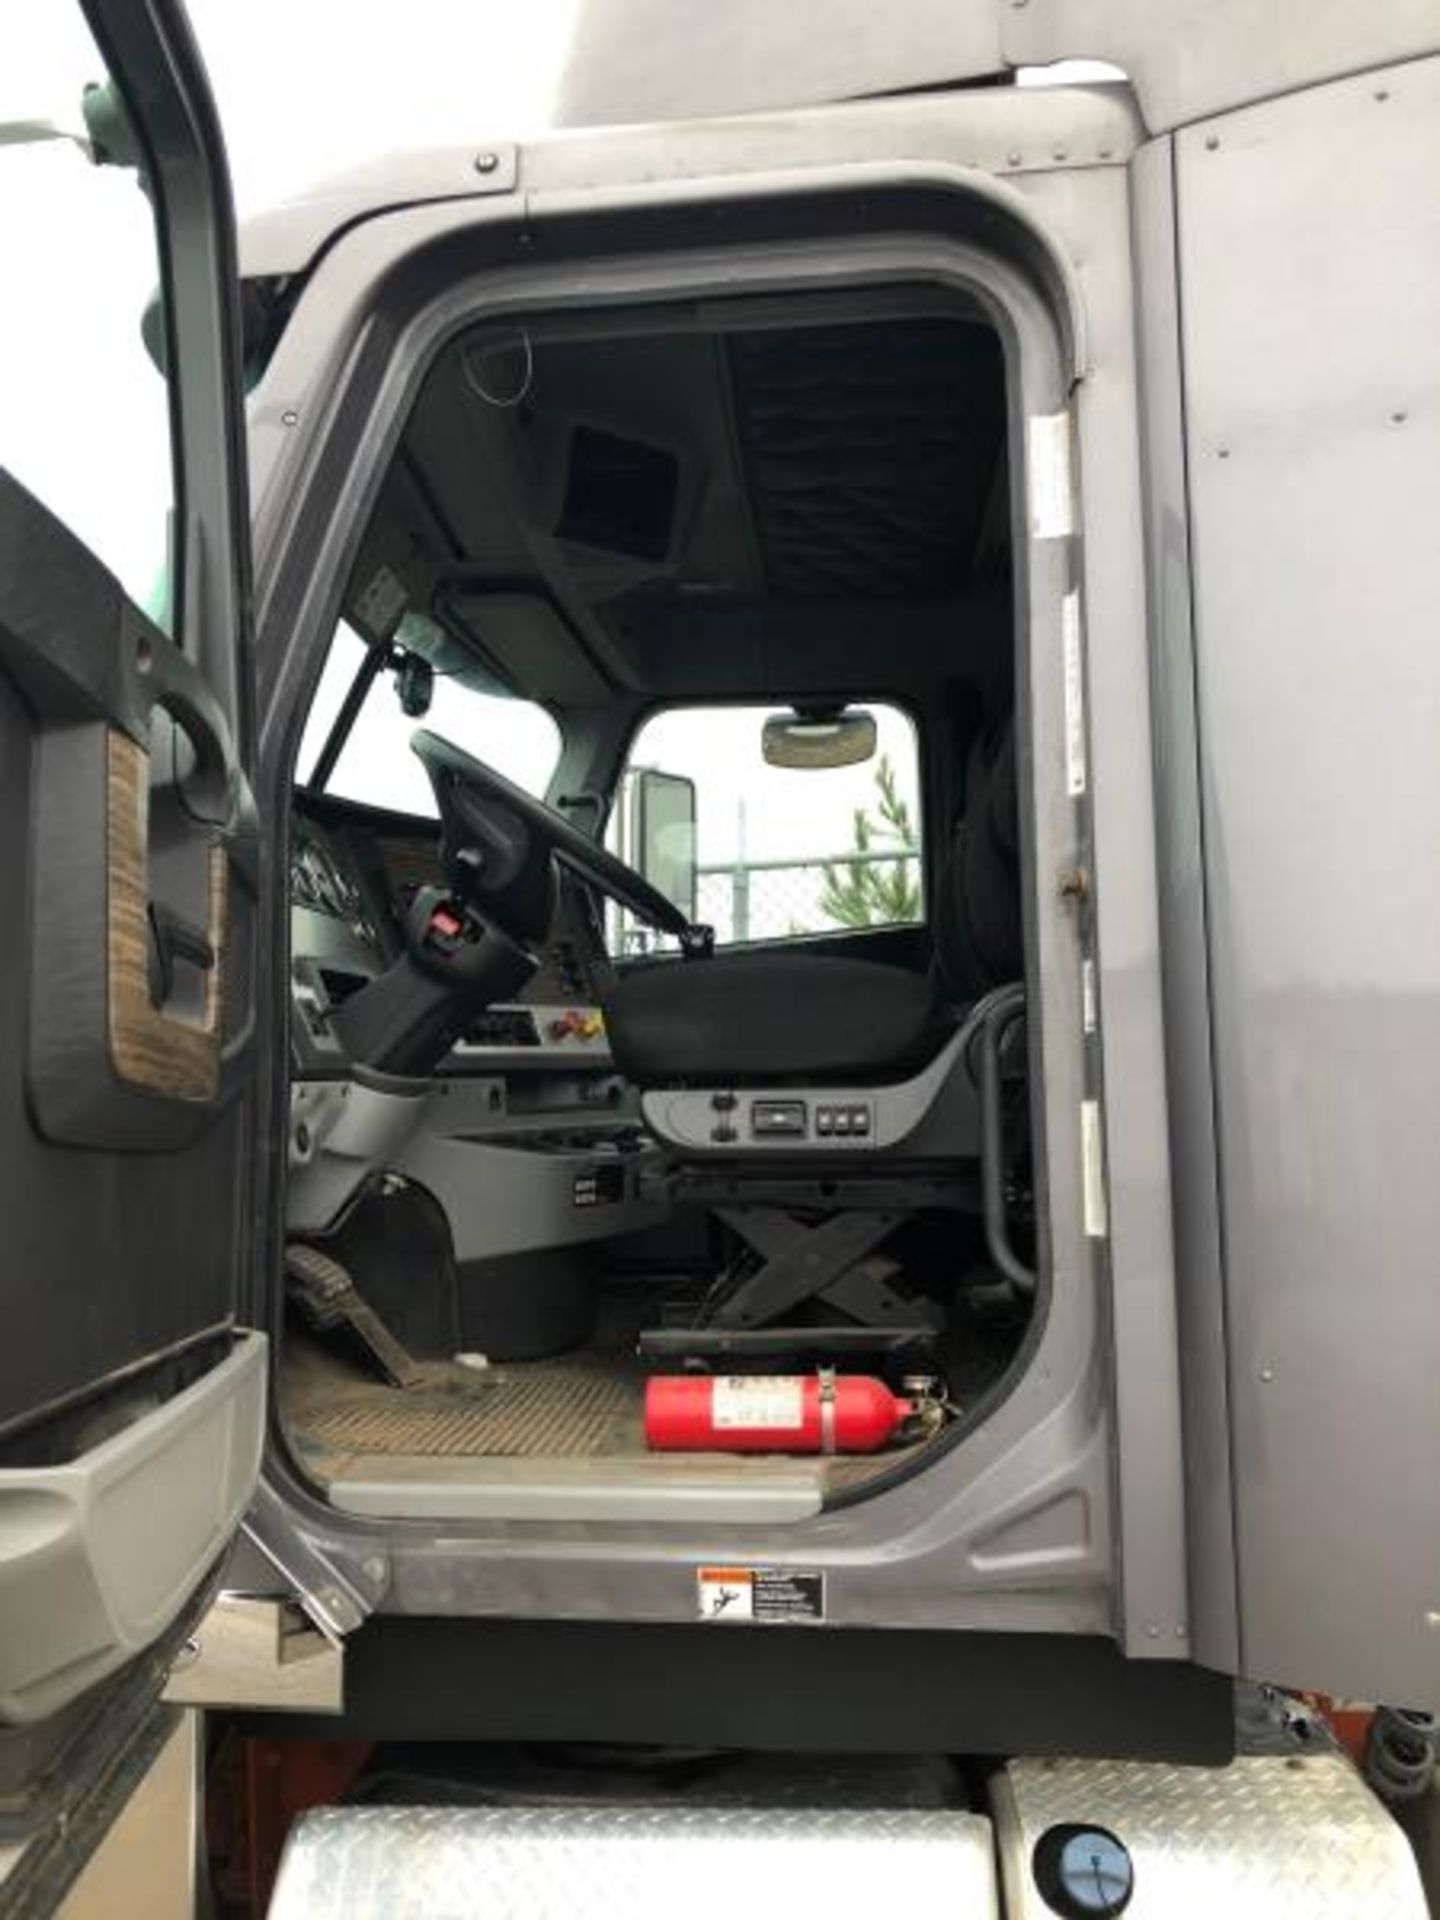 2017 Freightliner 122SD, 167,909 Miles - Image 3 of 28